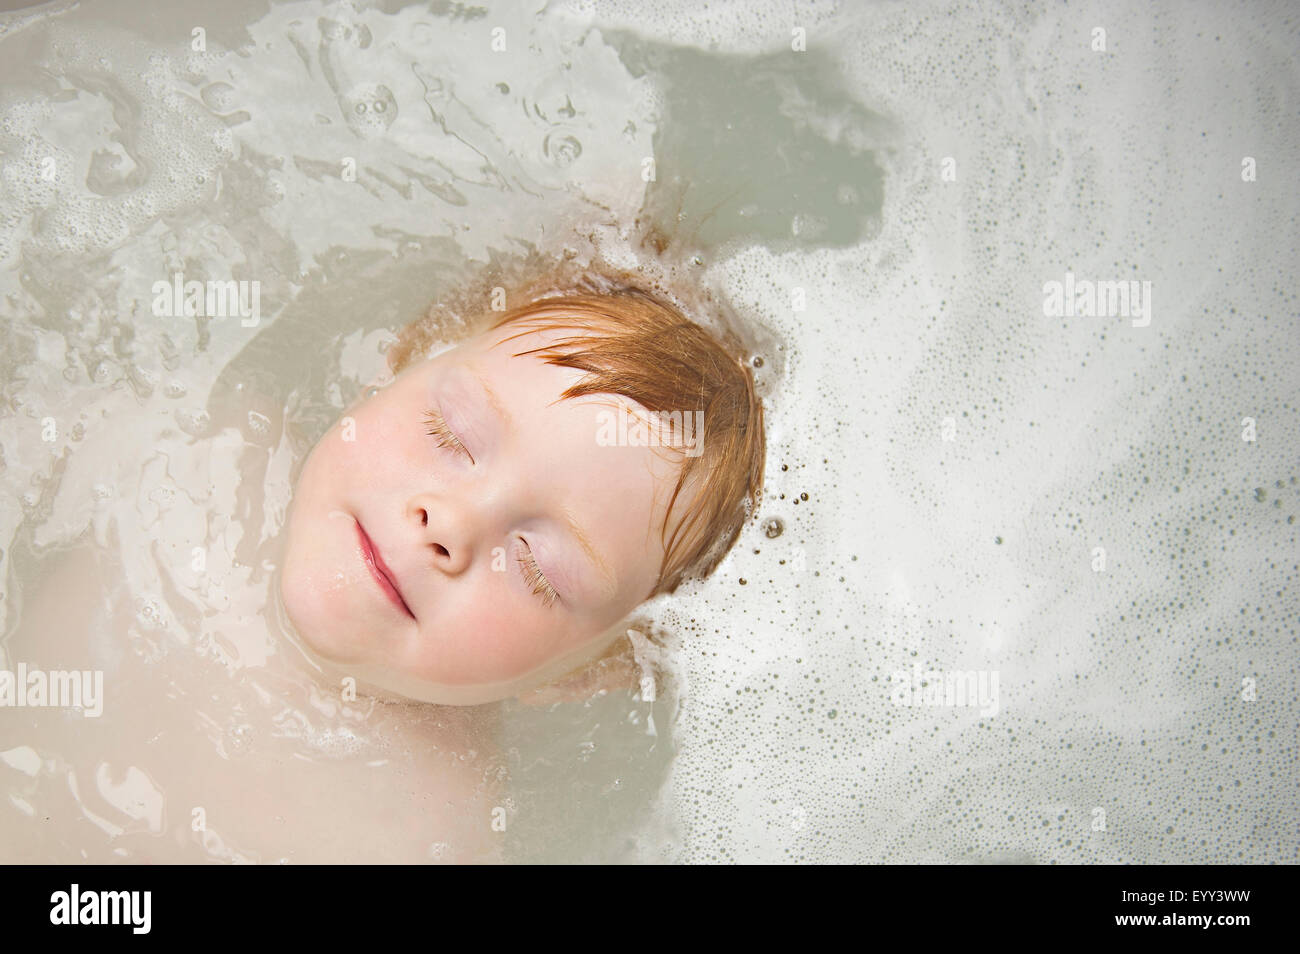 Caucasian boy with eyes closed in bubble bath Stock Photo